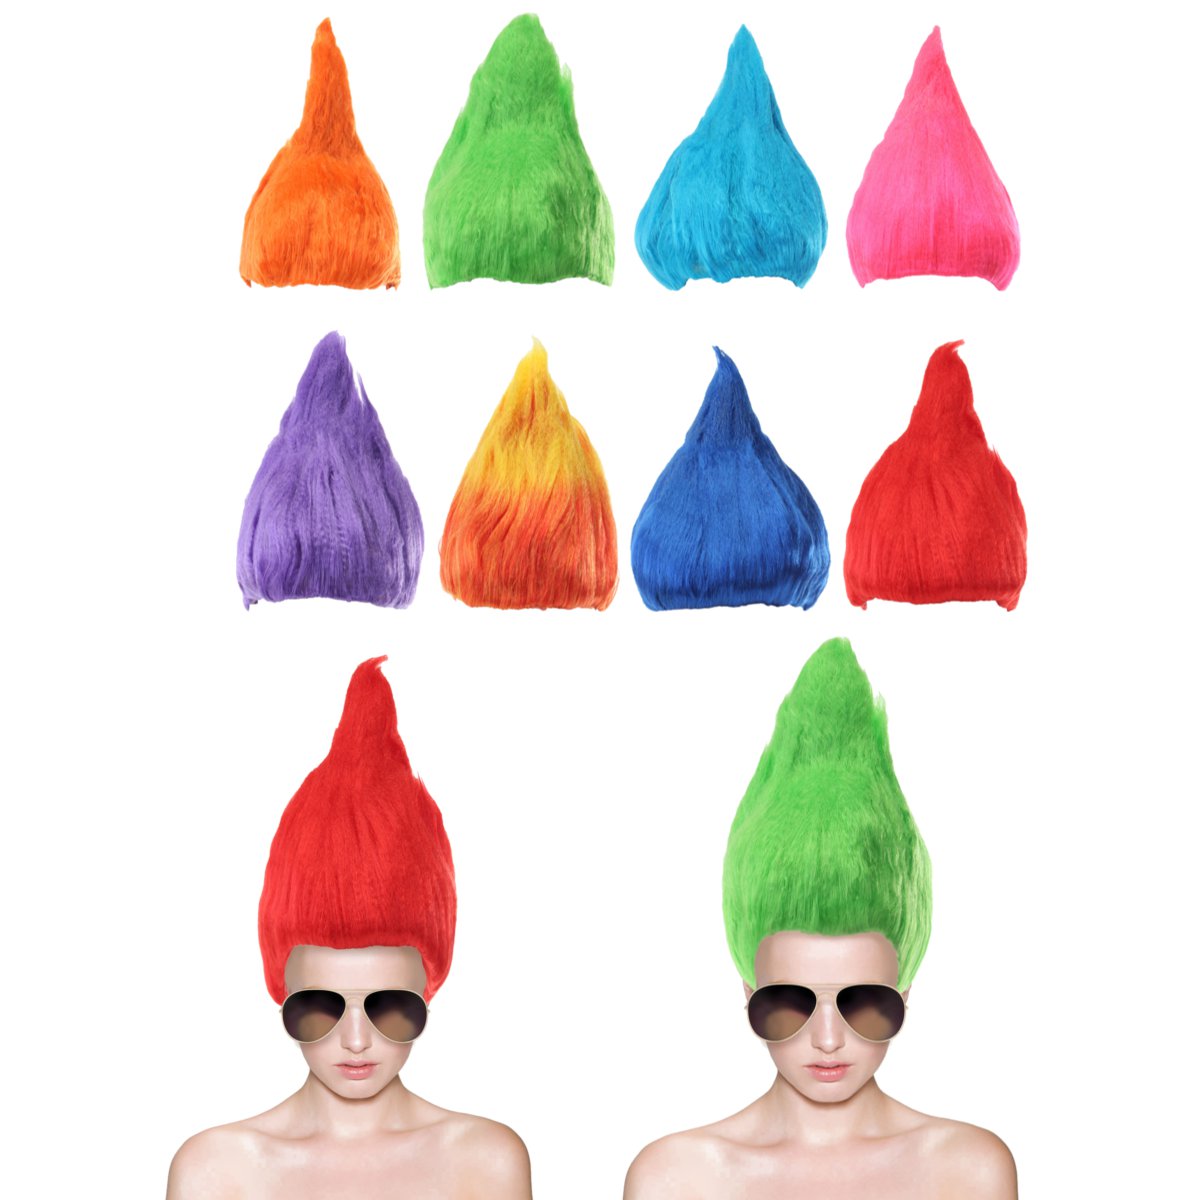 Elf-Flames-Shaped-Hair-Wig-Halloween-Colorful-Party-Cosplay-Masquerade-Dressing-Wigs-1187869-1